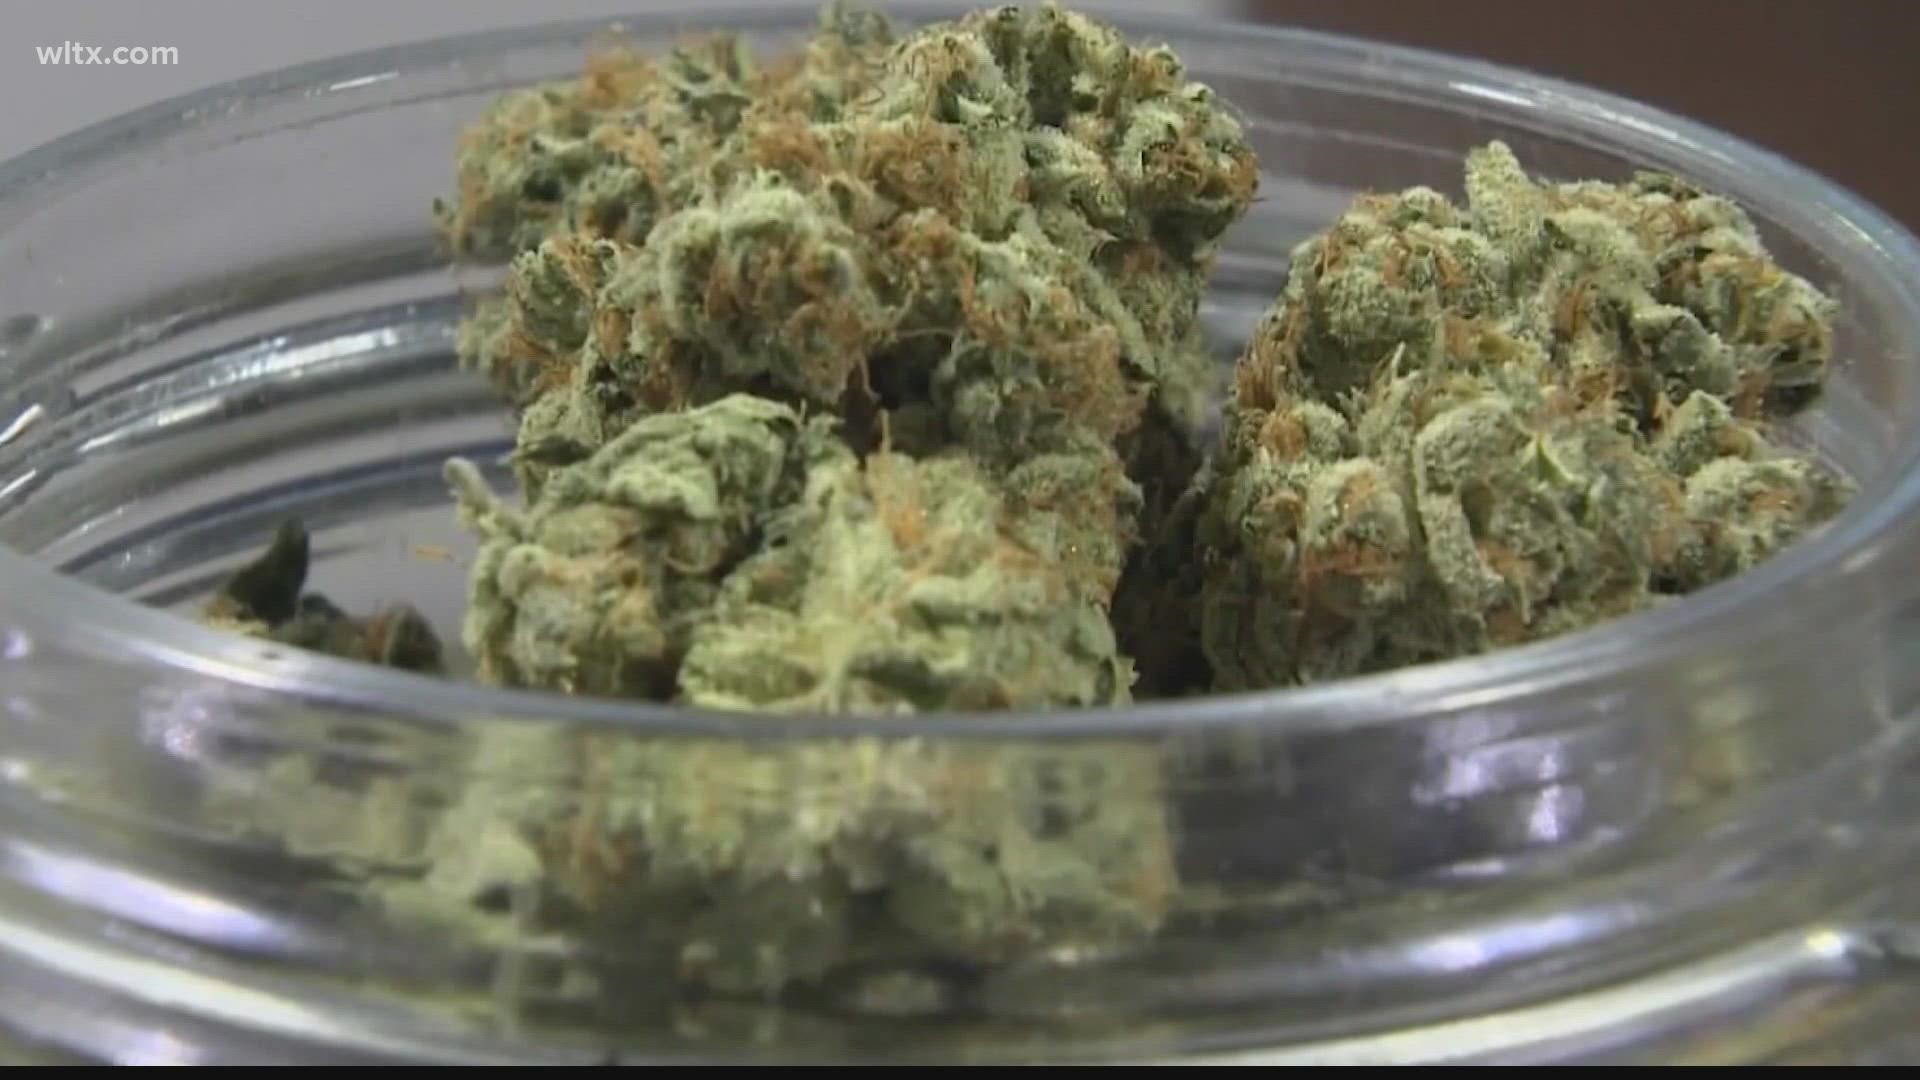 House lawmakers will soon debate and vote on a bill to legalize medical marijuana in South Carolina.